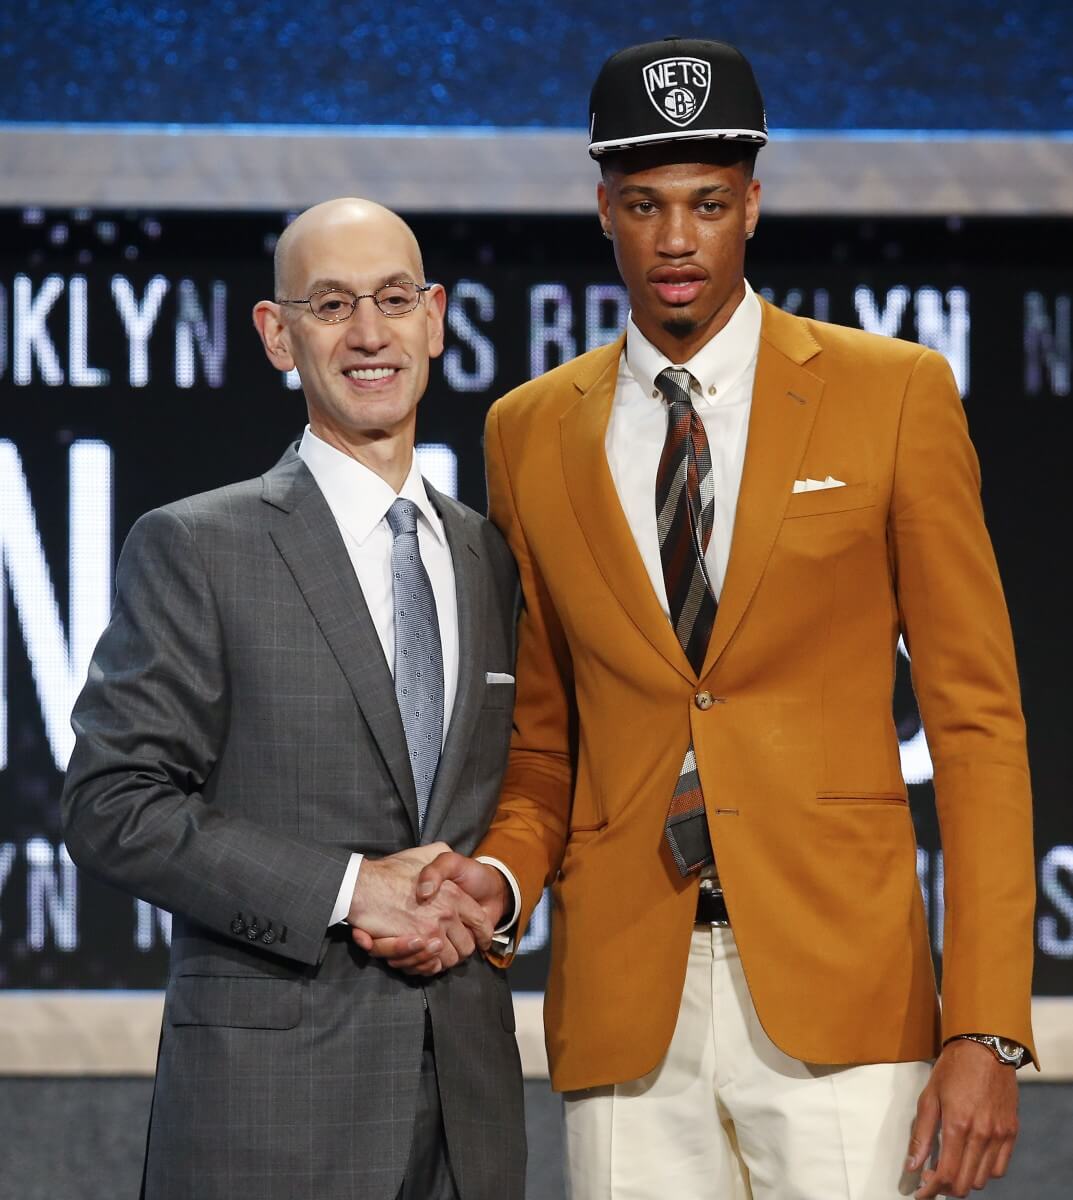 Chris McCullough went to the Nets at 29. (AP)